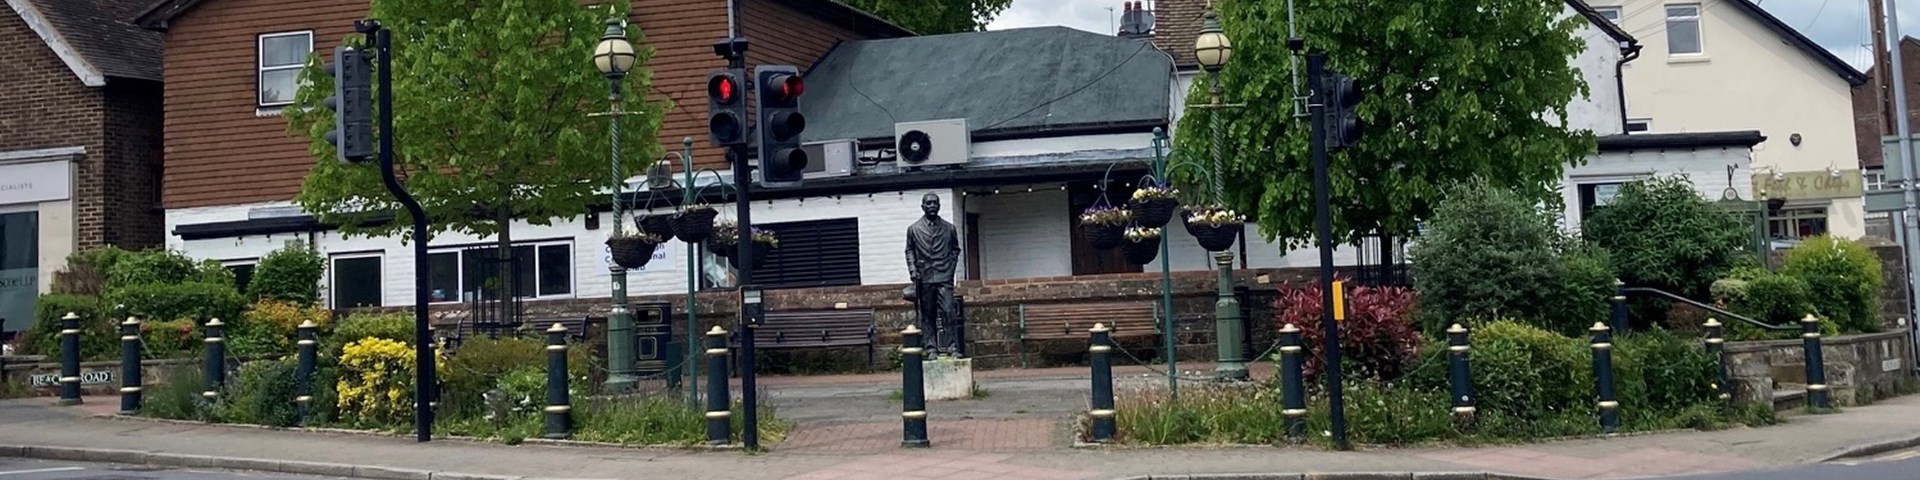 Crowborough streets with the Statue of Sir Arthur Conan Doyle